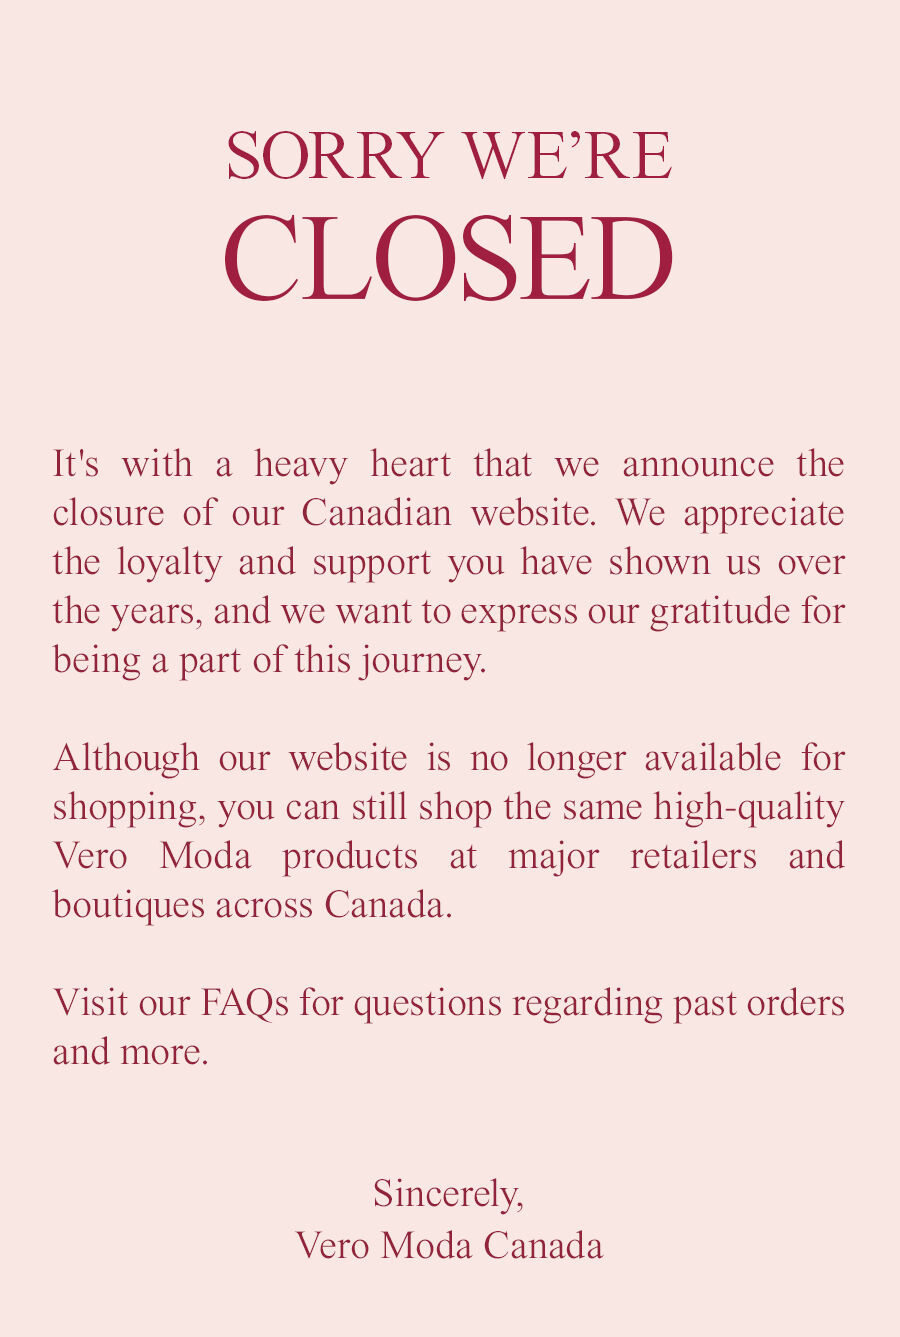 Sorry we’re closed. It's with a heavy heart that we announce the closure of our Canadian website. We appreciate the loyalty and support you have shown us over the years, and we want to express our gratitude for being a part of this journey.   Although our website is no longer available for shopping, you can still shop the same high-quality Vero Moda products at major retailers and boutiques across Canada.   Visit our FAQs for questions regarding past orders and more.  Sincerely,  Vero Moda Canada